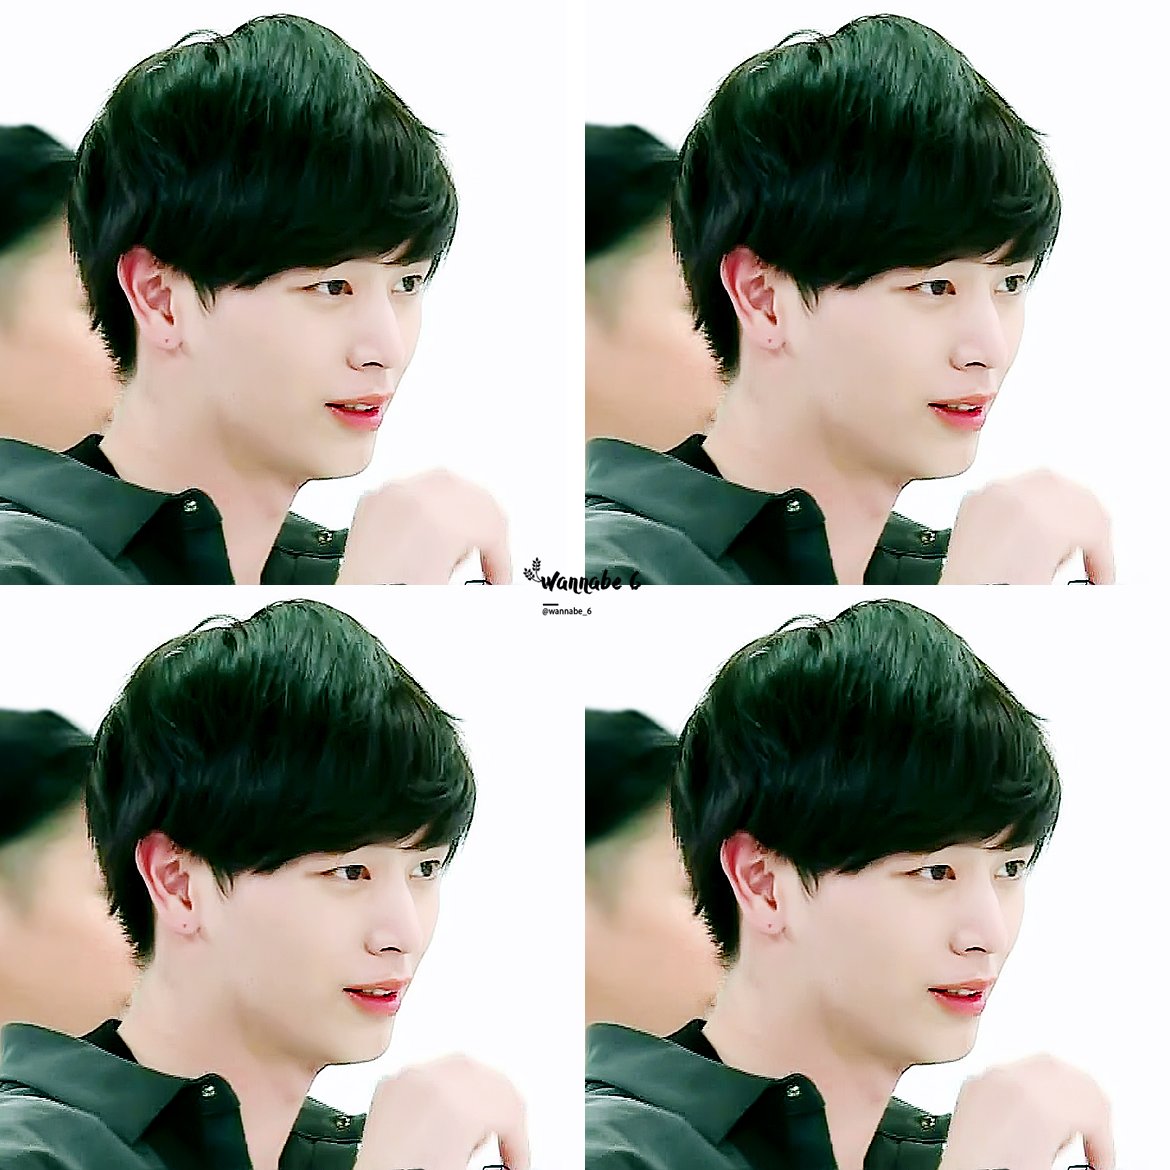 ᴅ-468throwback to 160803 sungjae 